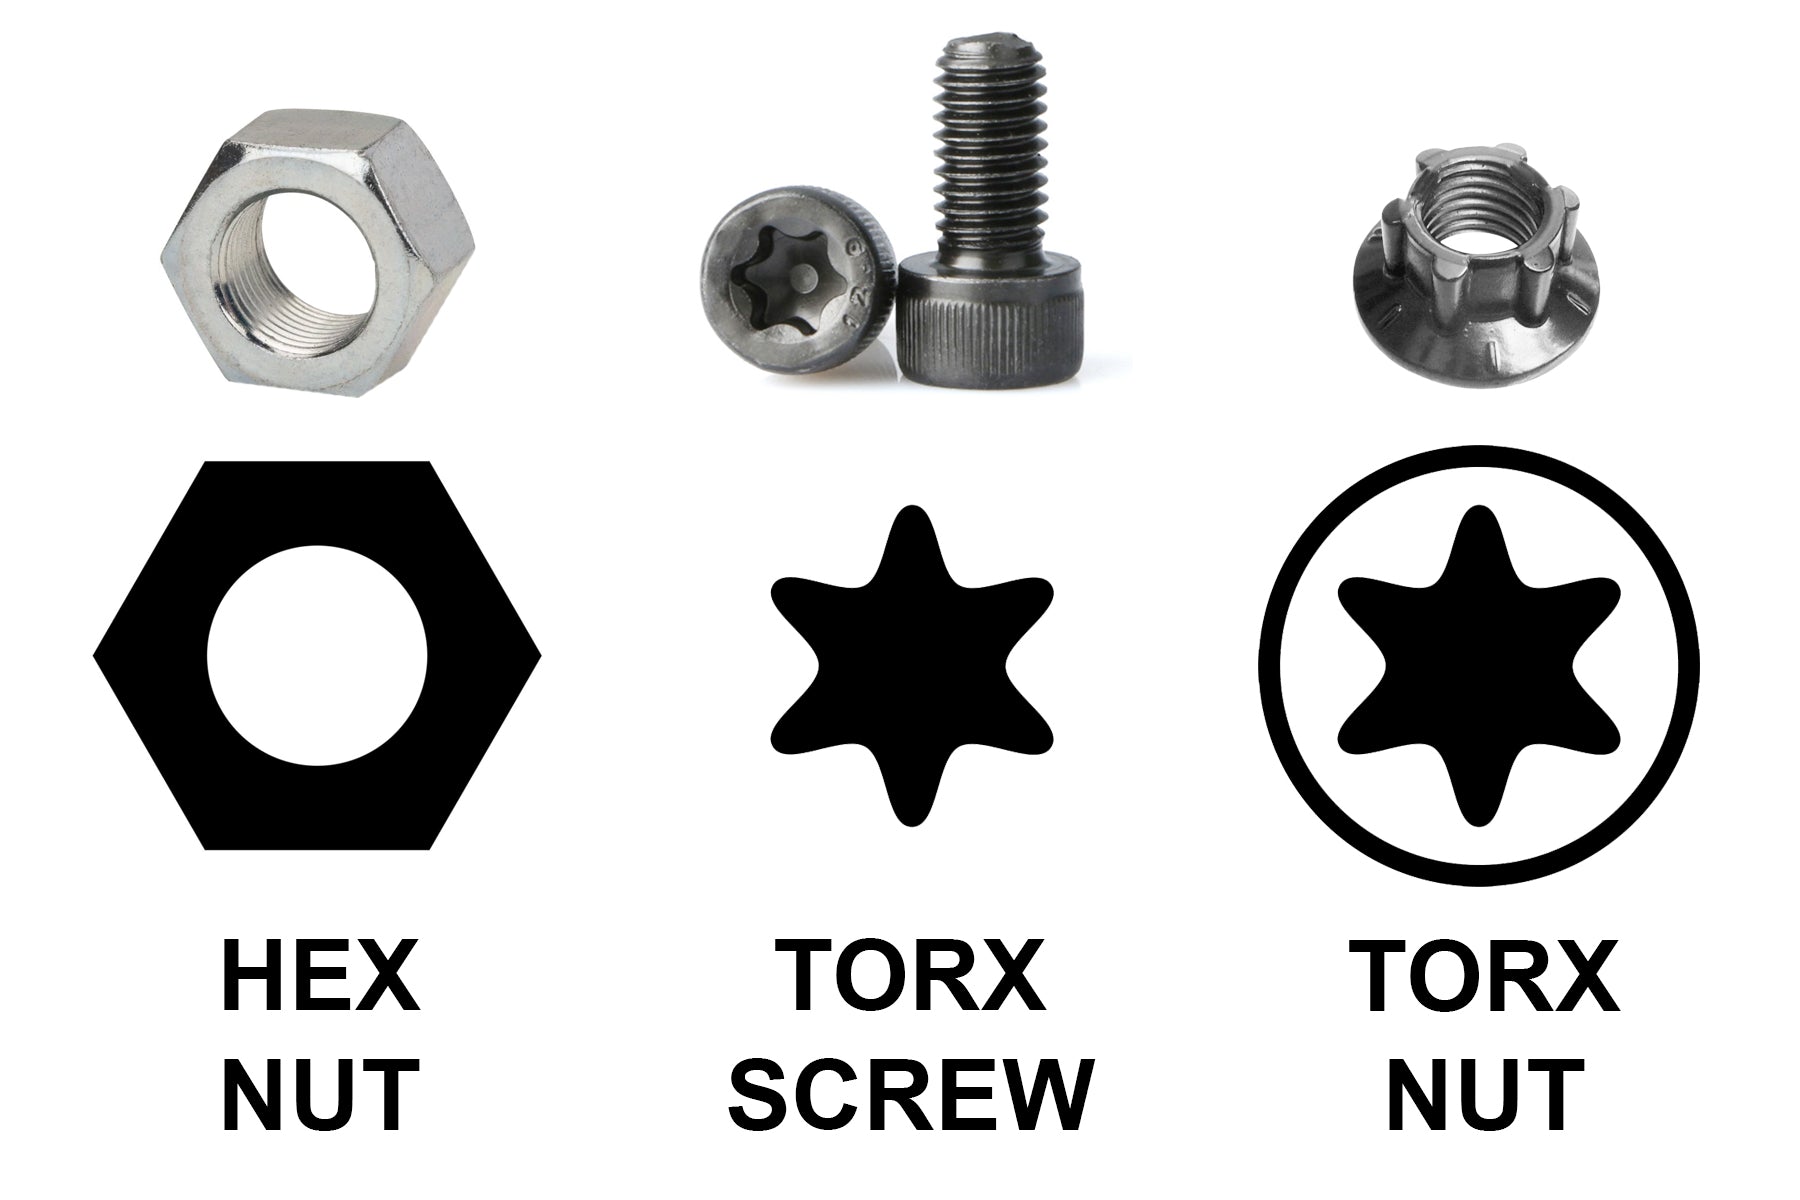 a diagram displaying the three different types of hardware used to secure a seat frame, hex nut, tox screw, and torx nut